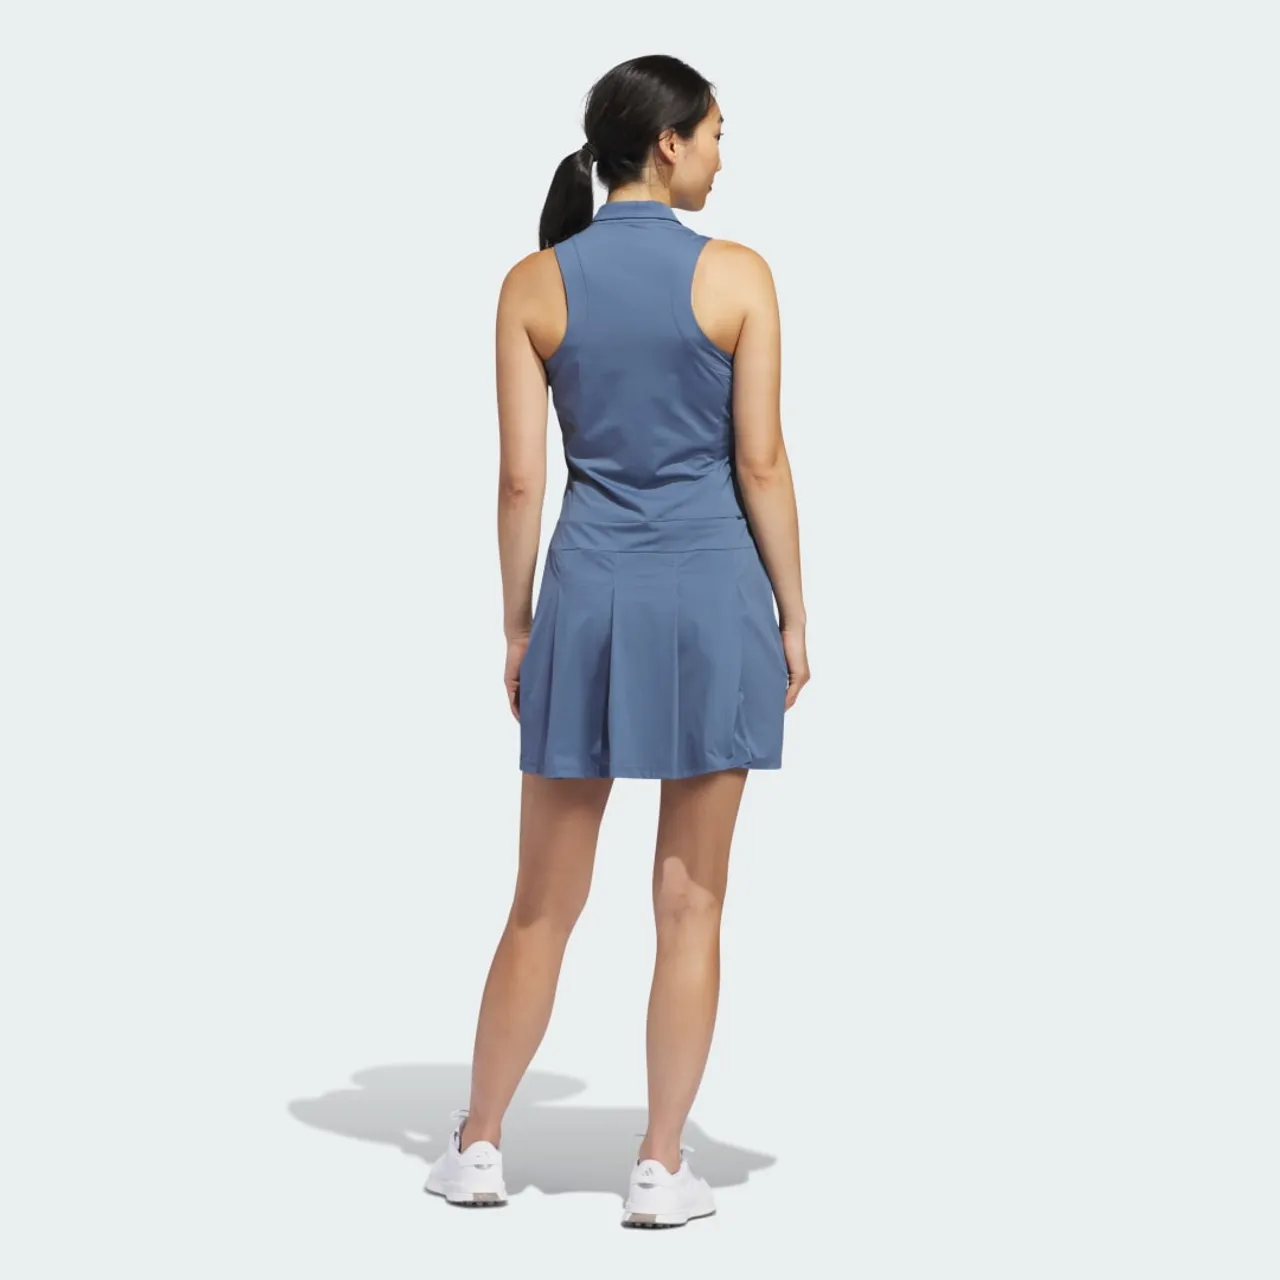 Women's Ultimate365 Tour Pleated Dress